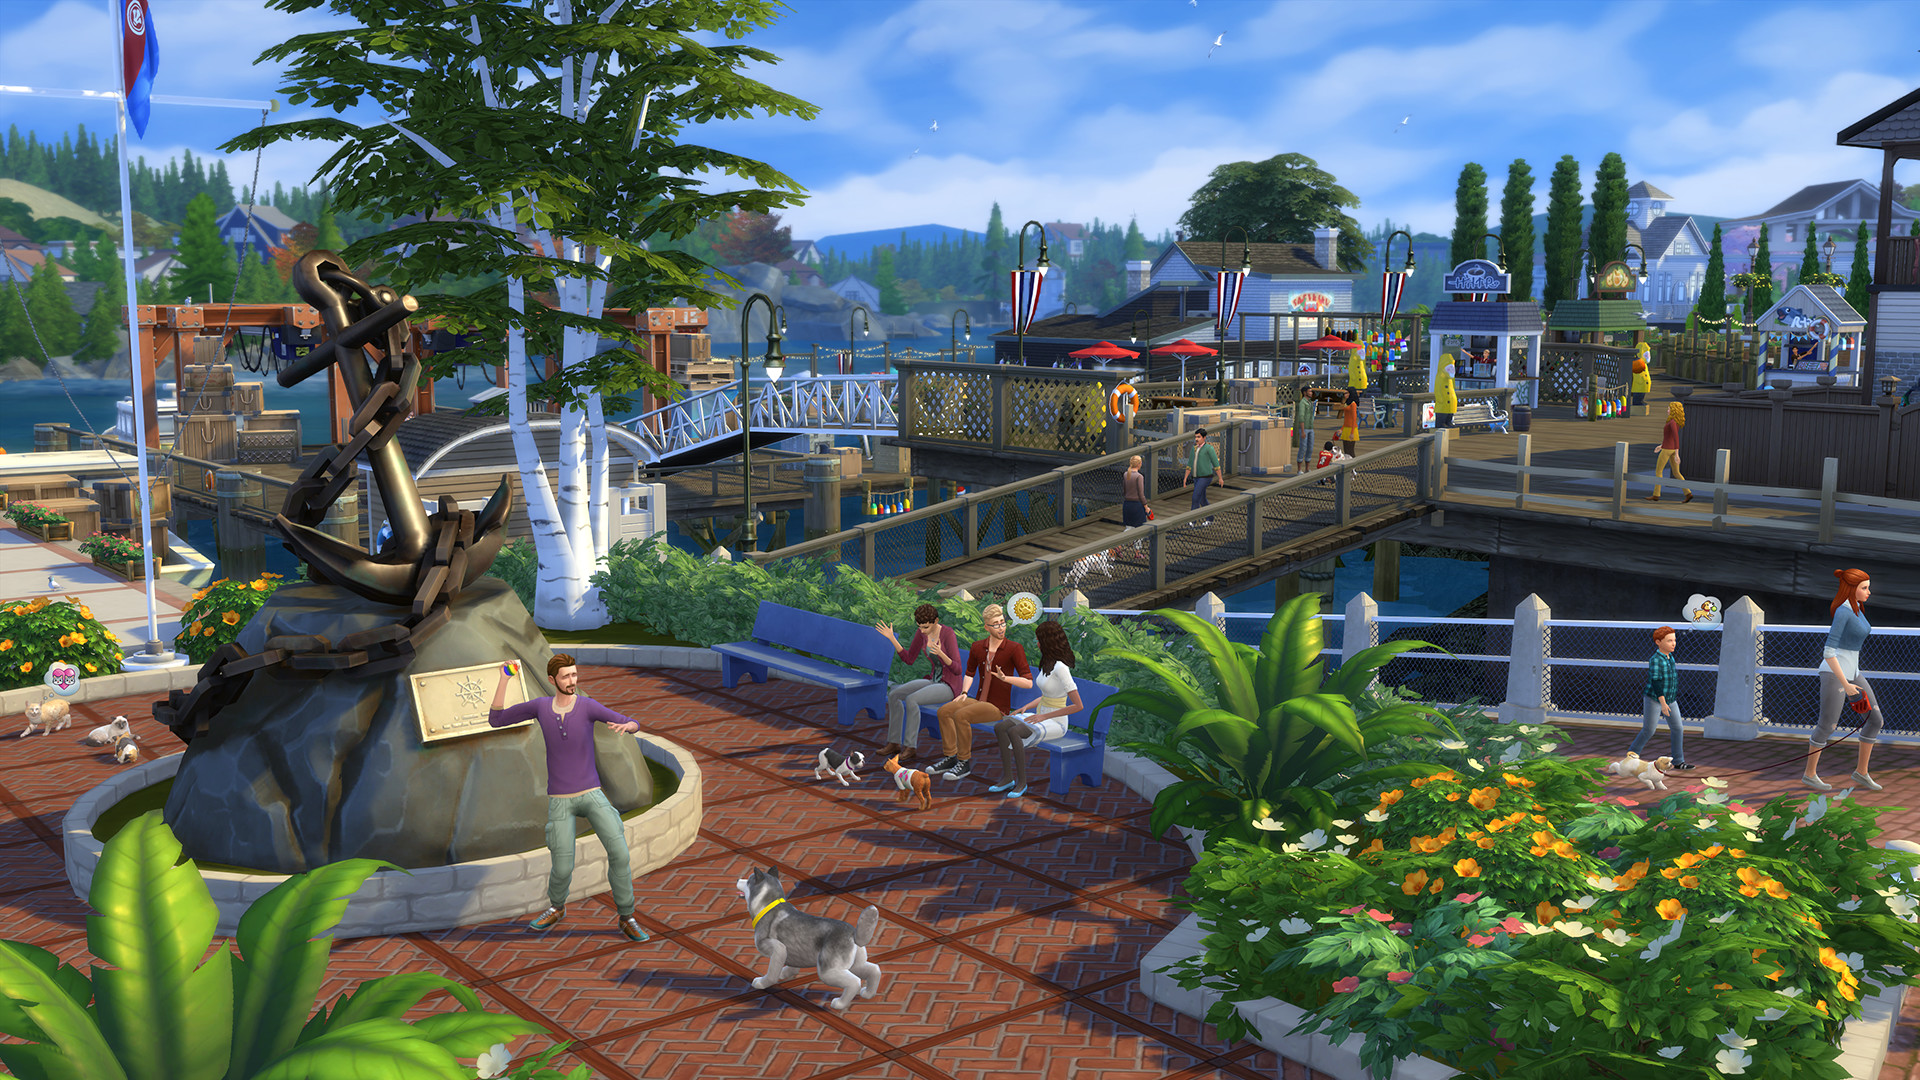 get the sims 4 cats and dogs for free